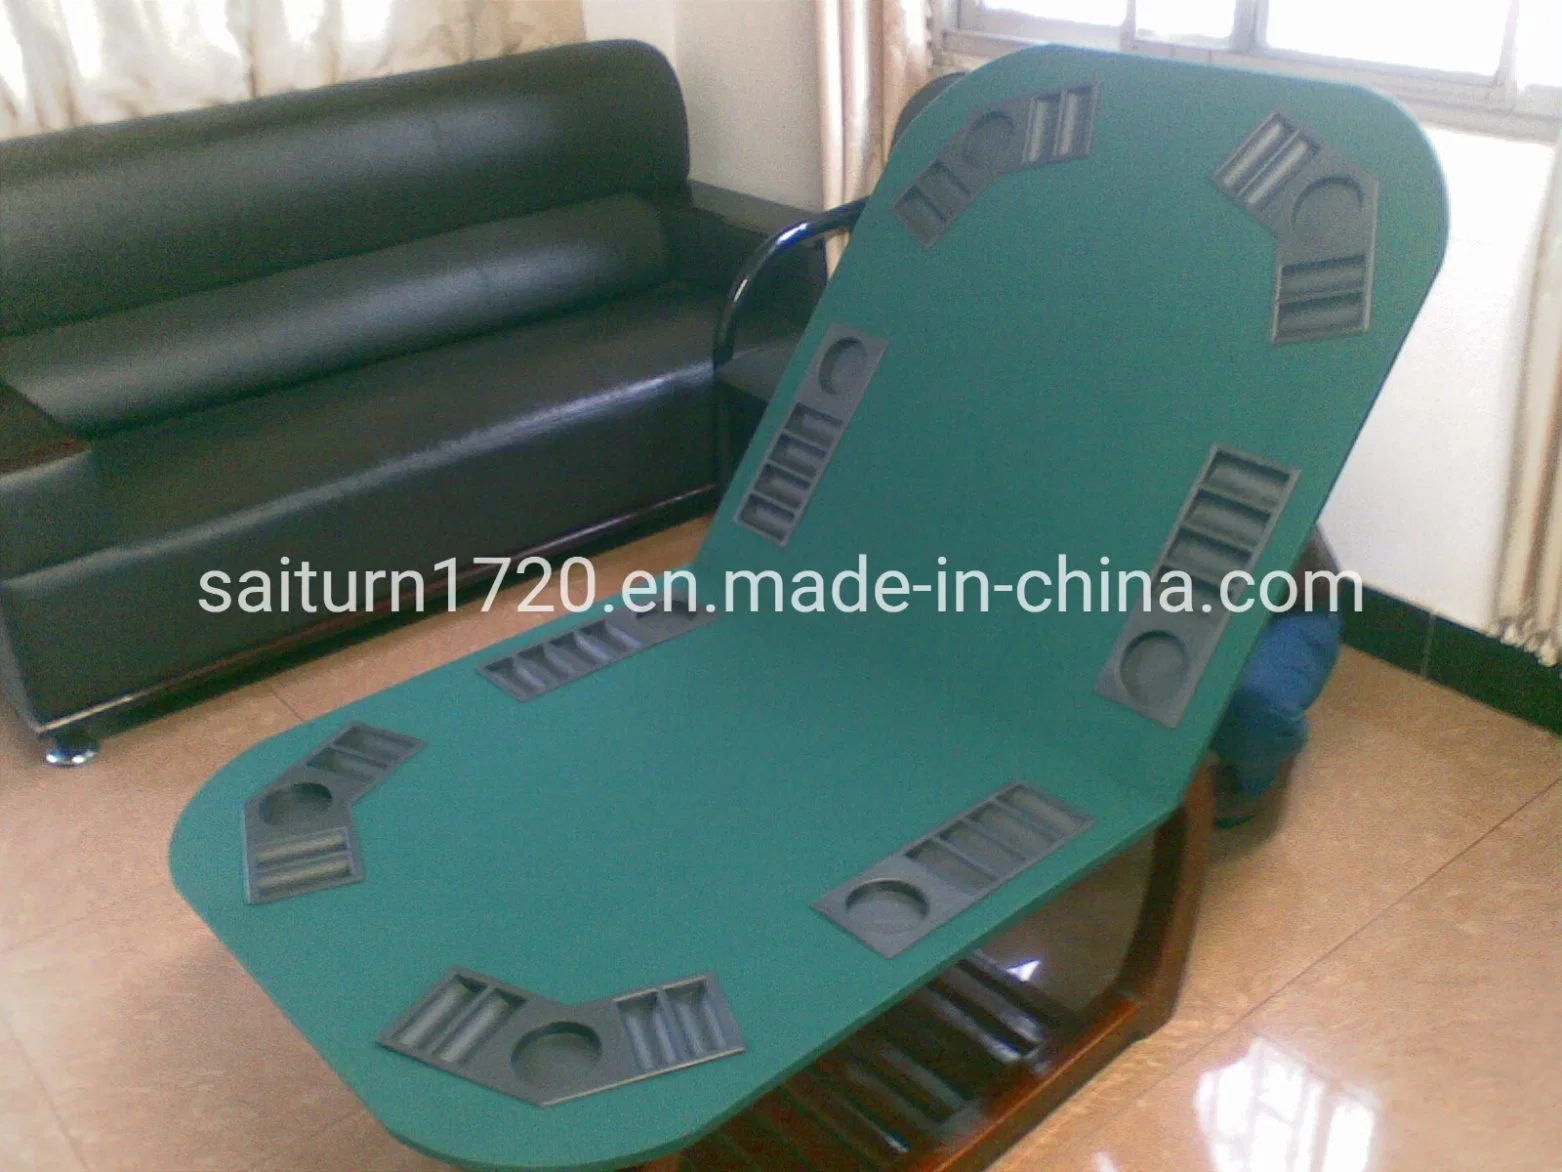 73' Two Folden Oval Poker Table Top with Double Side Green Fabric